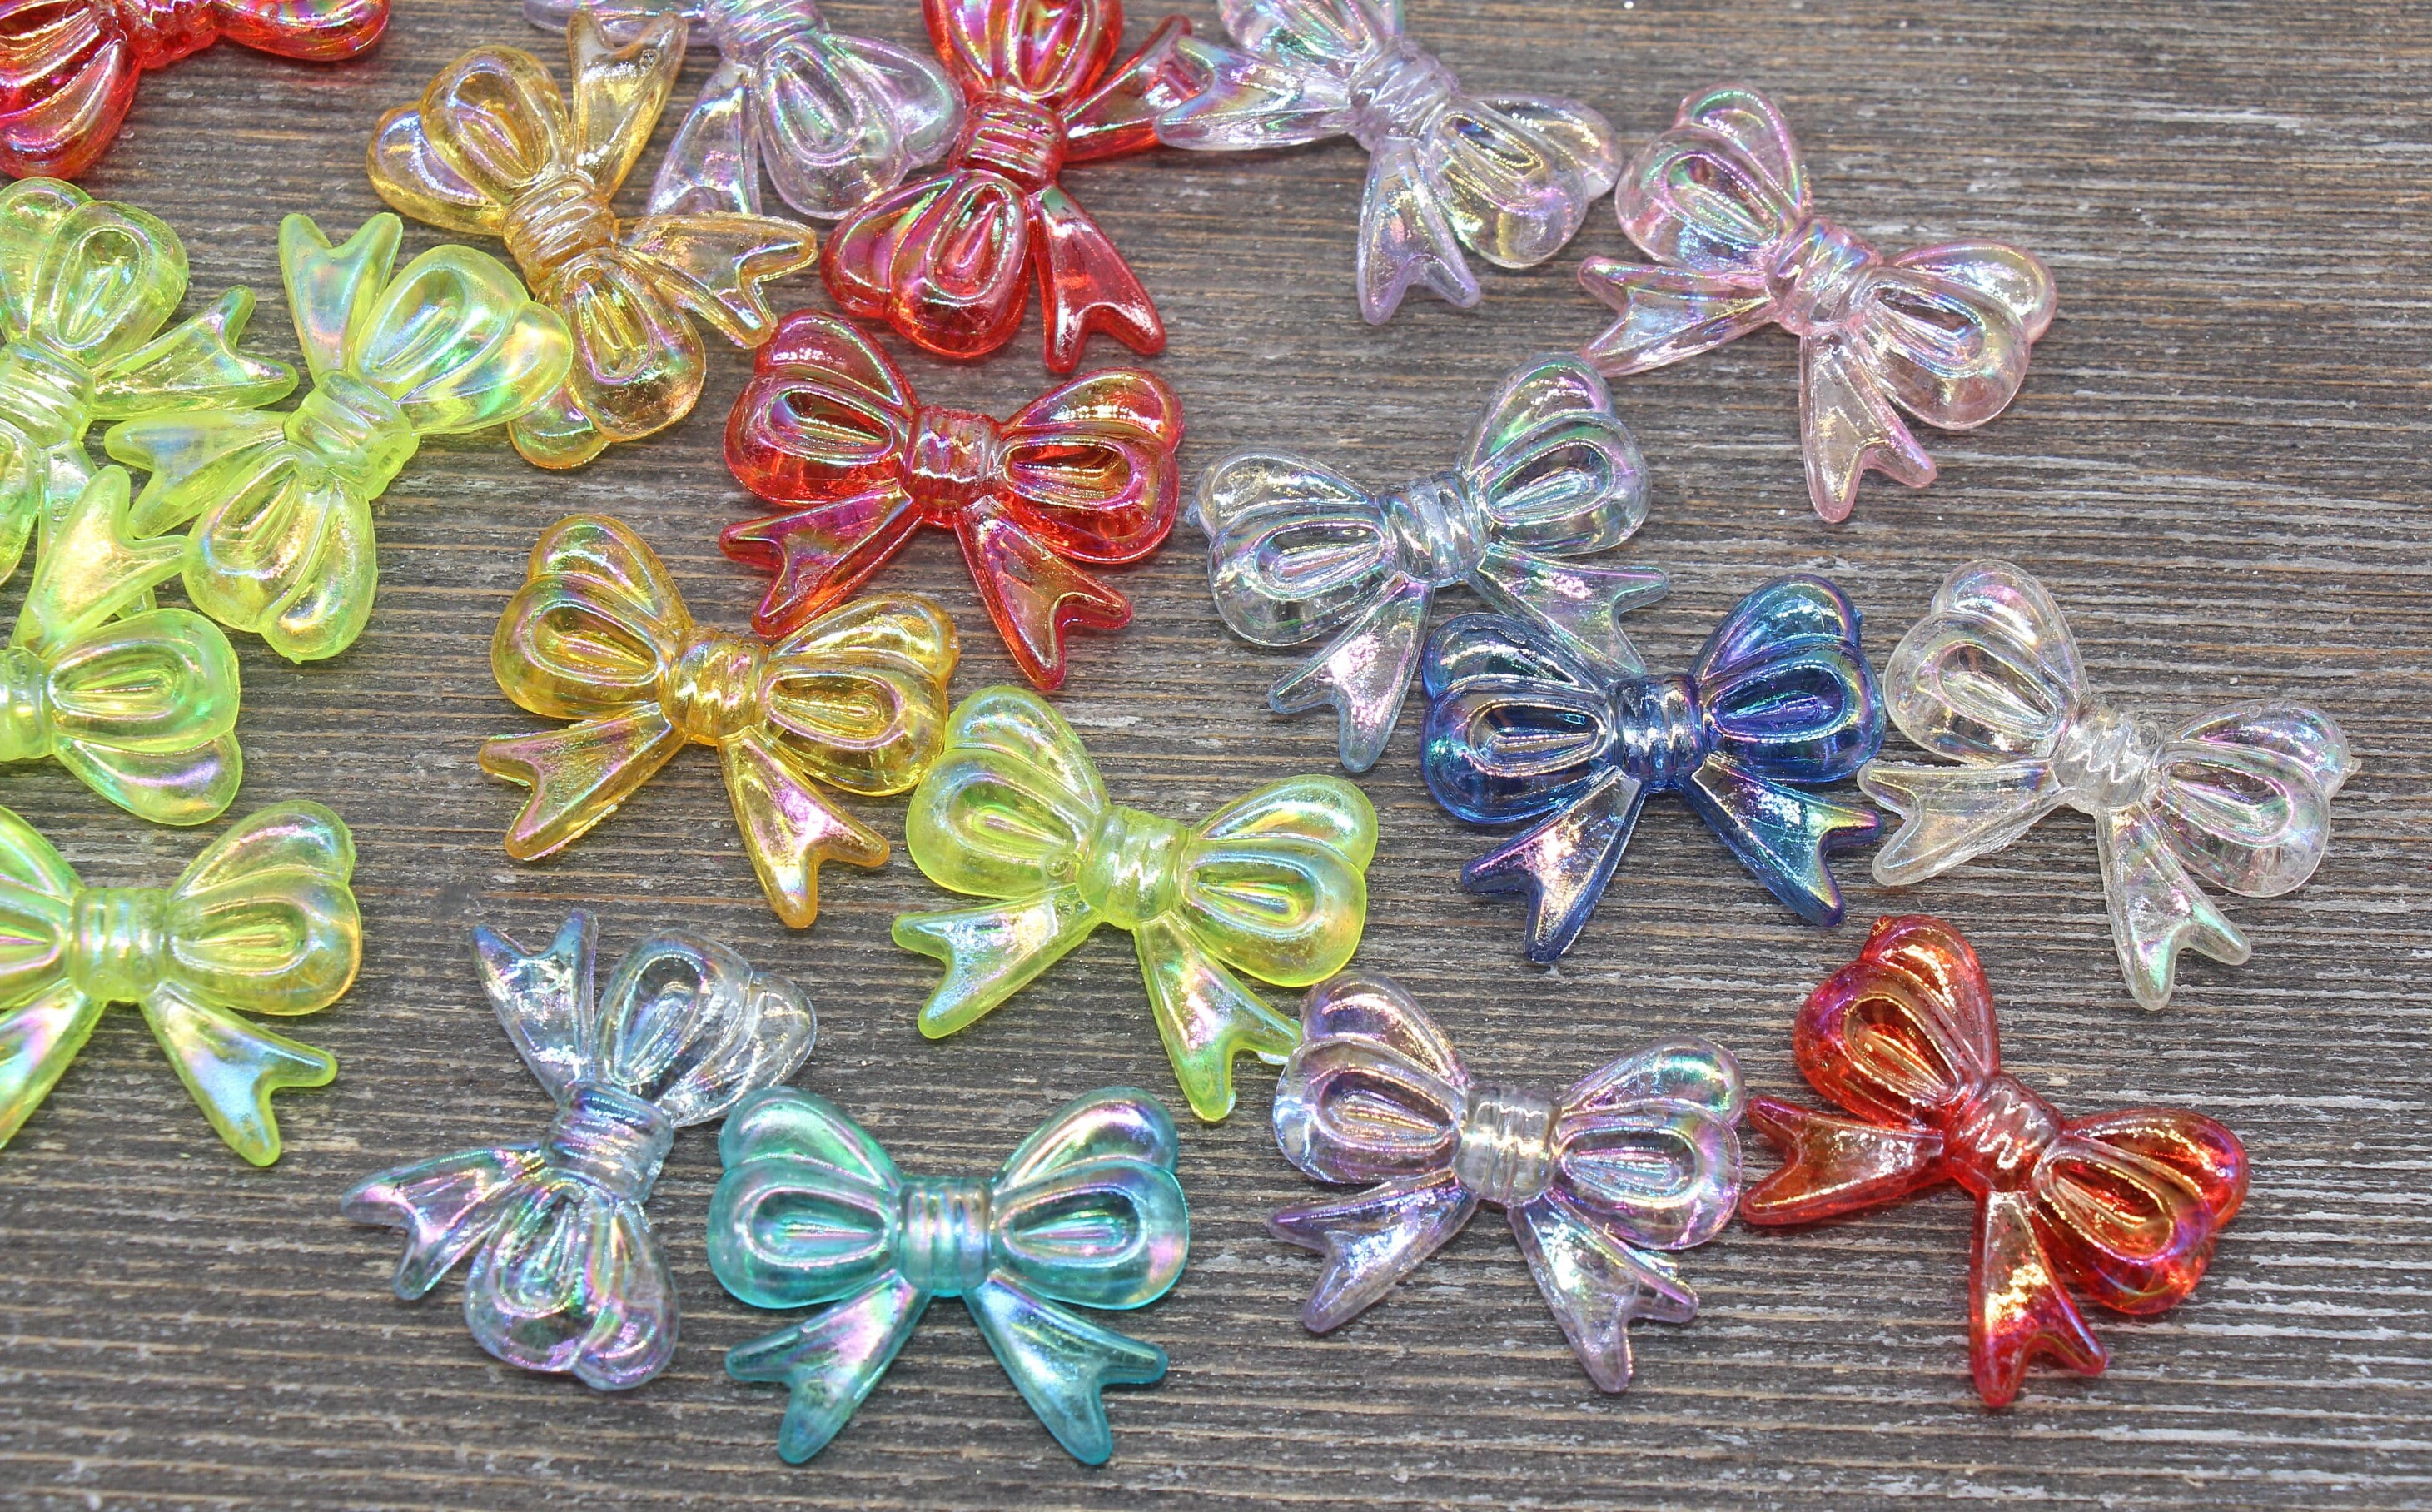 10-100pcs AB Colored Bow Beads,13 Colors Acrylic Bow Beads, Vertical Hole Bow  Beads, Jewelry Beads 24x33mm 